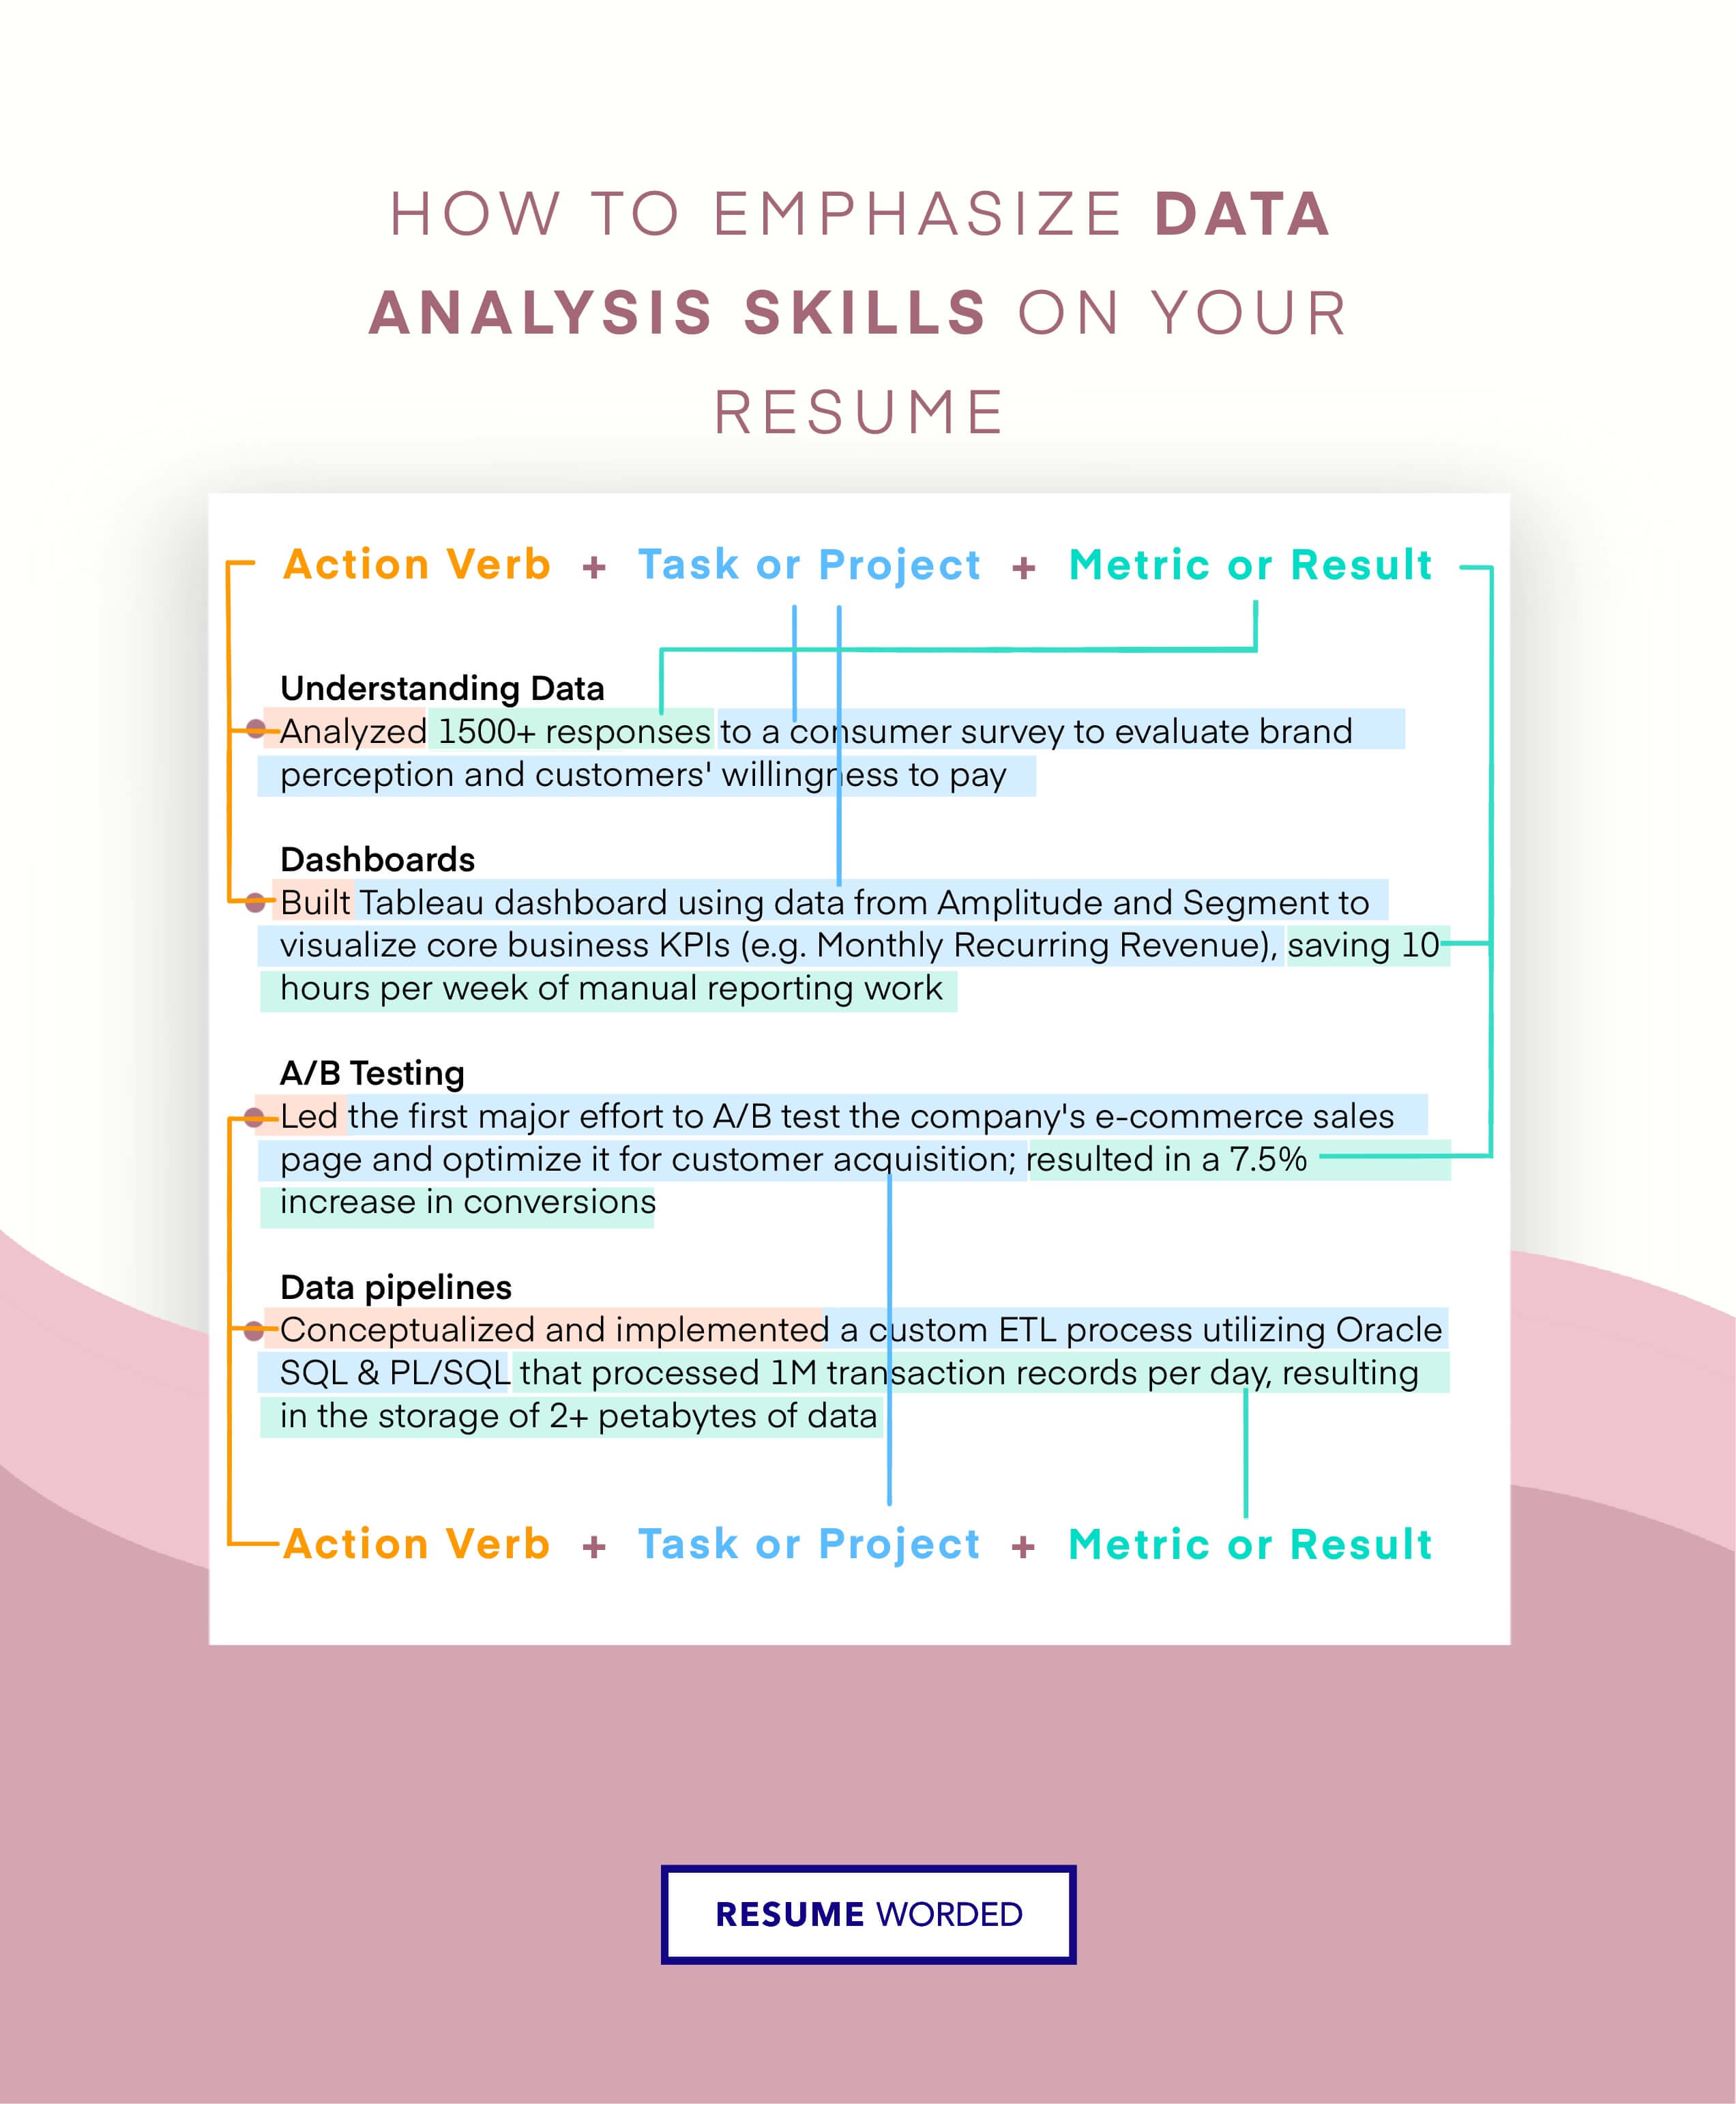 Highlight your Experience with AI and Data Analysis - Salesforce Marketing (Cloud) CV